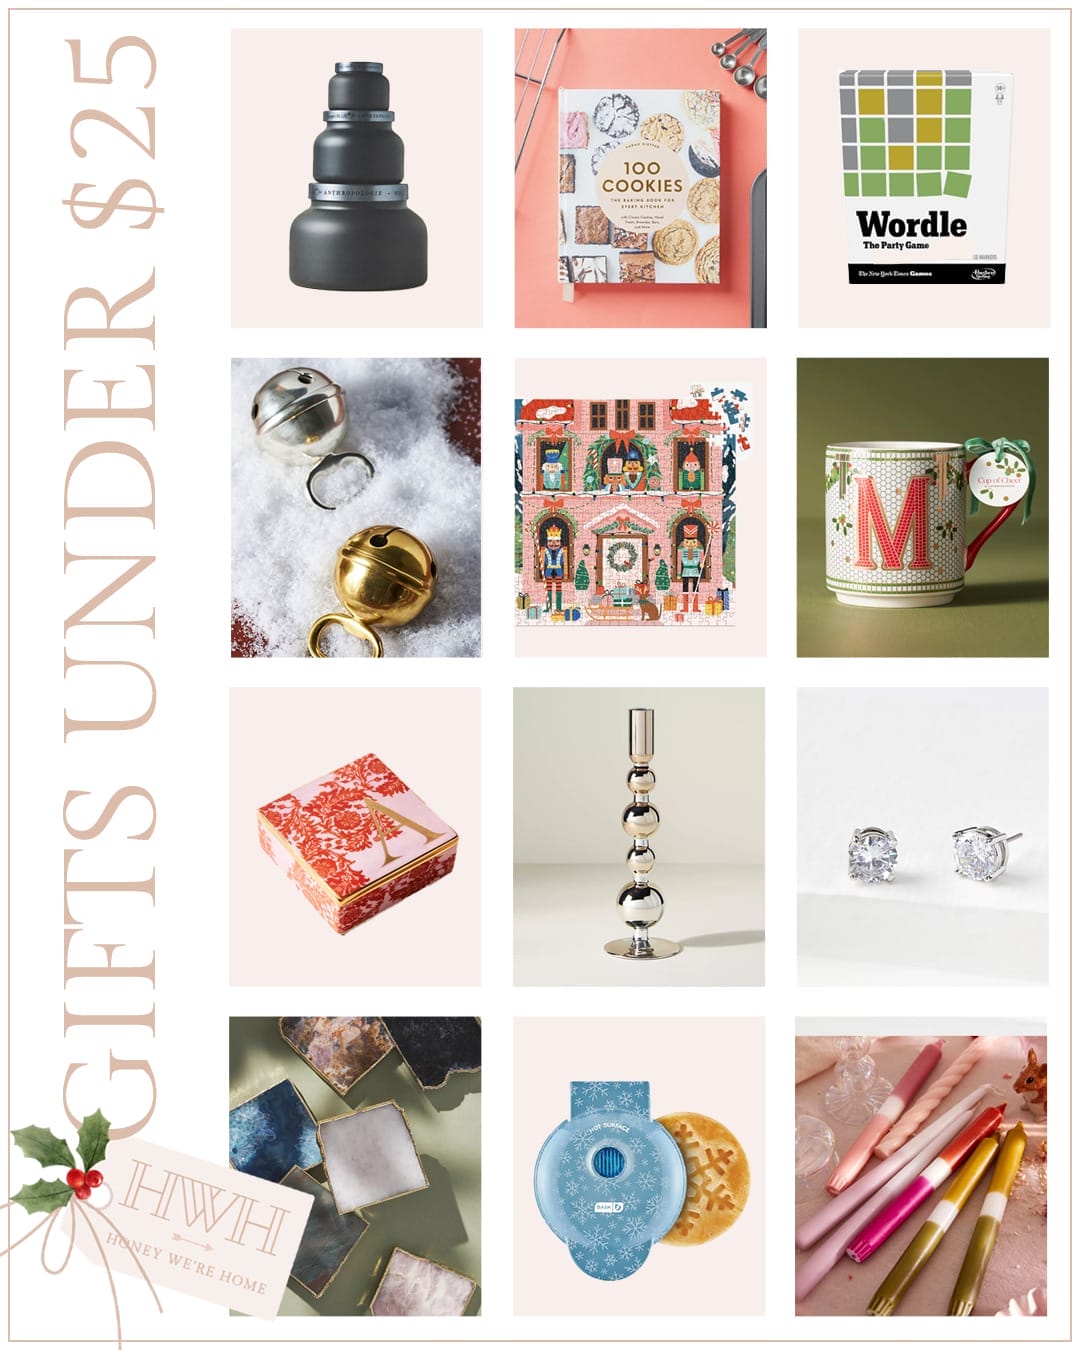 Favorite Things Party Gift Ideas (Under $25) - House Of Hipsters